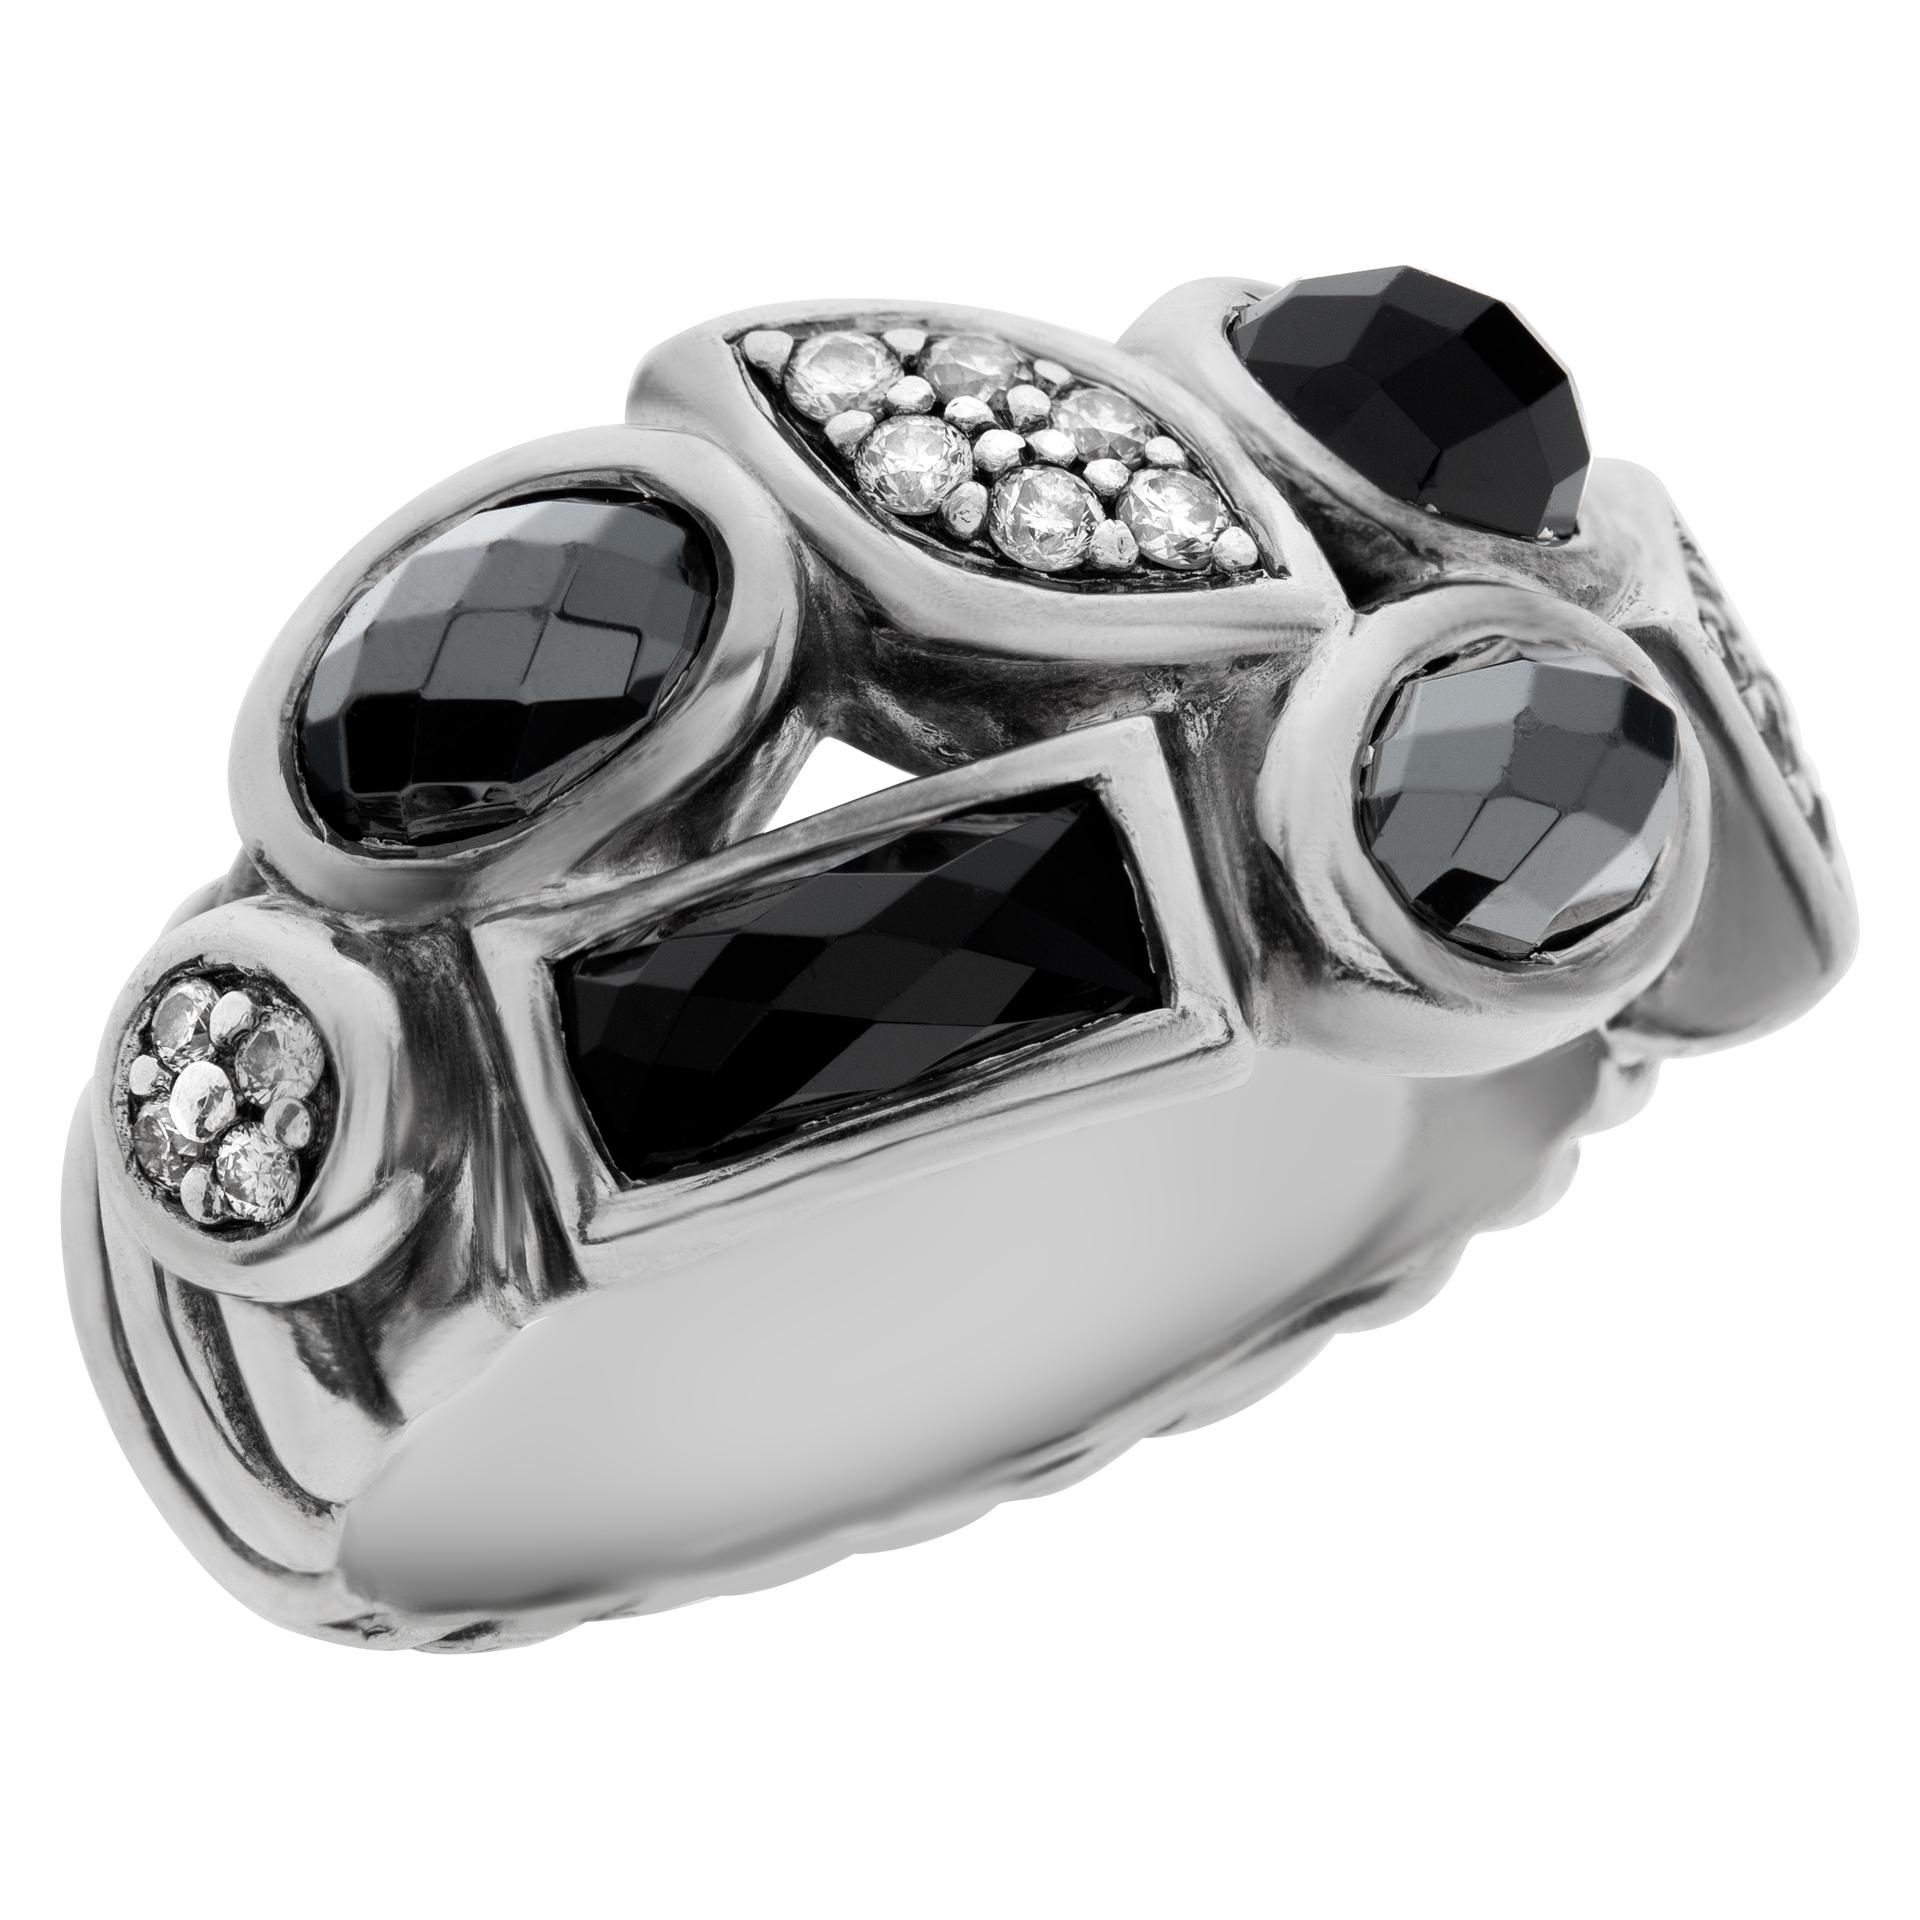 David Yurman Confetti Onyx Hematite and Diamond Double Row Sterling Silver Ring In Excellent Condition For Sale In Surfside, FL